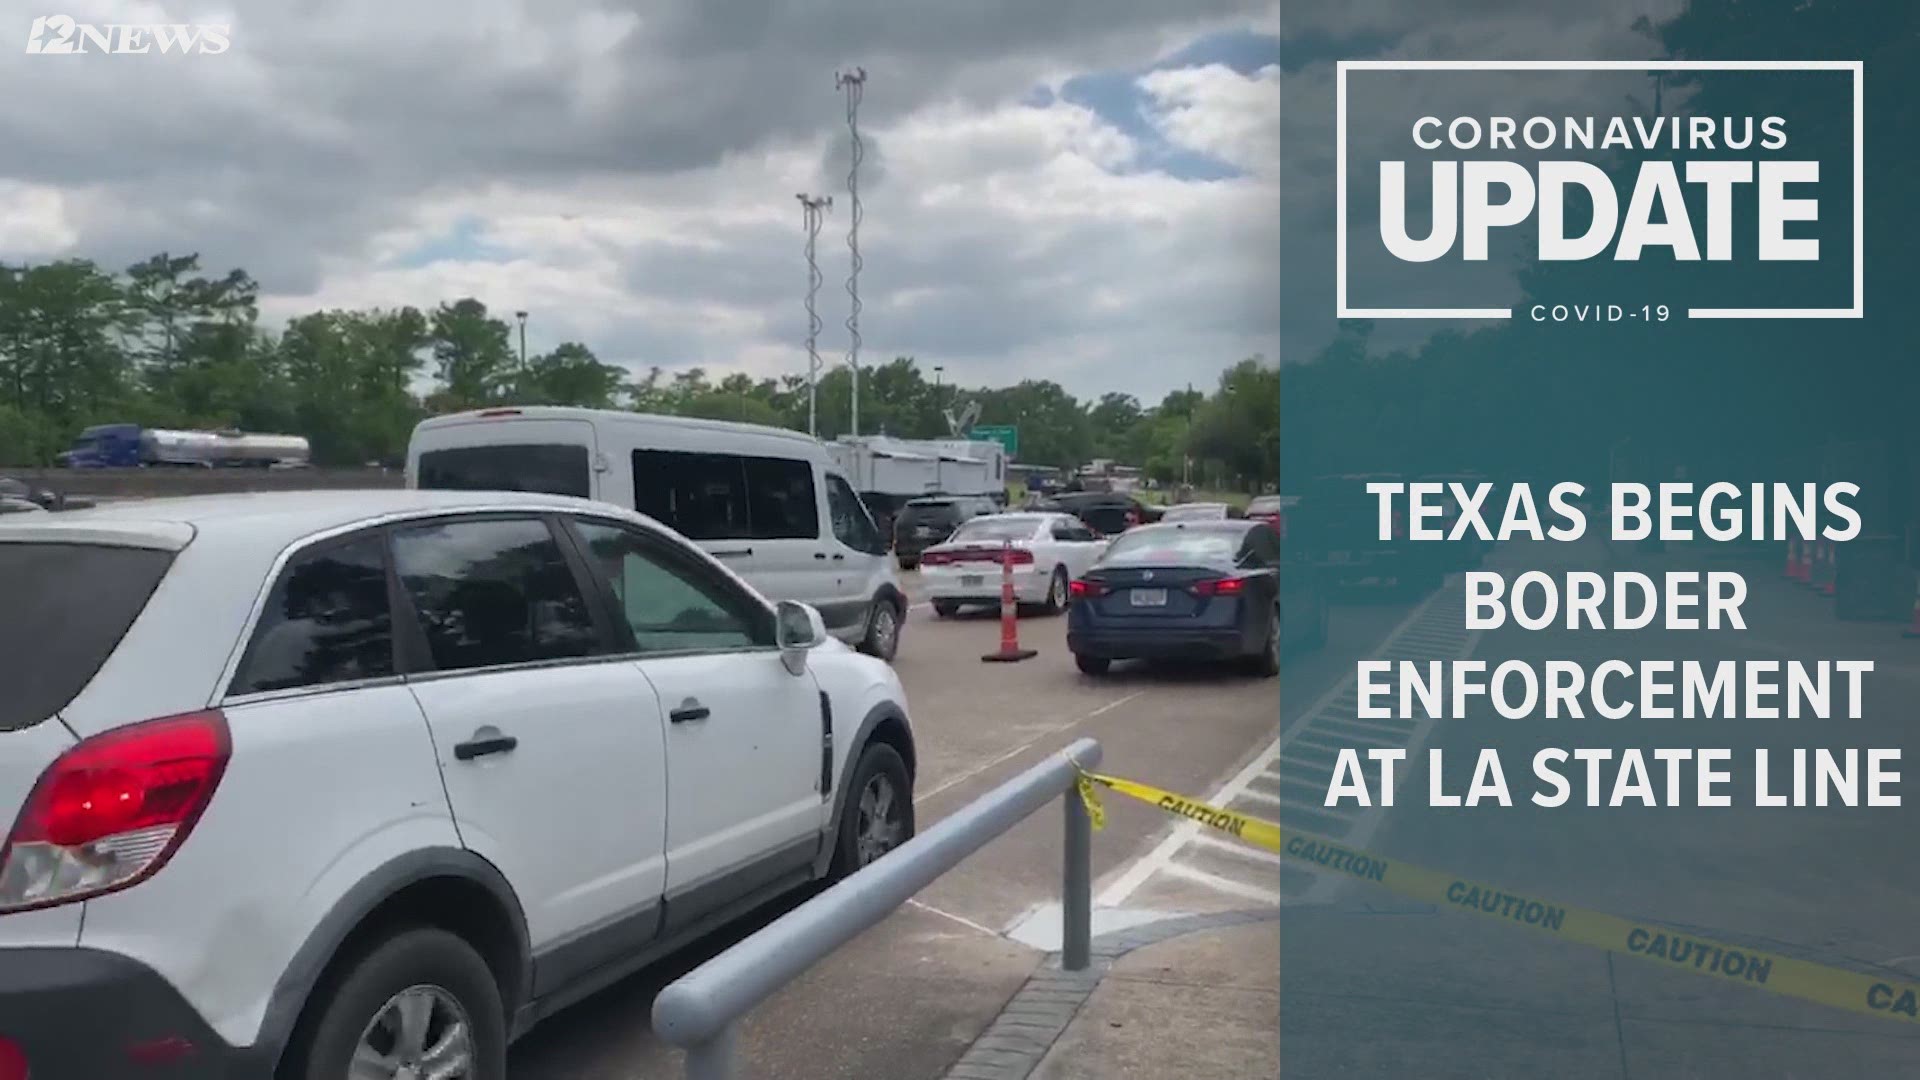 Louisiana State Police issued a traffic advisory Sunday morning warning of potential traffic congestion when traveling west into Texas from Louisiana.